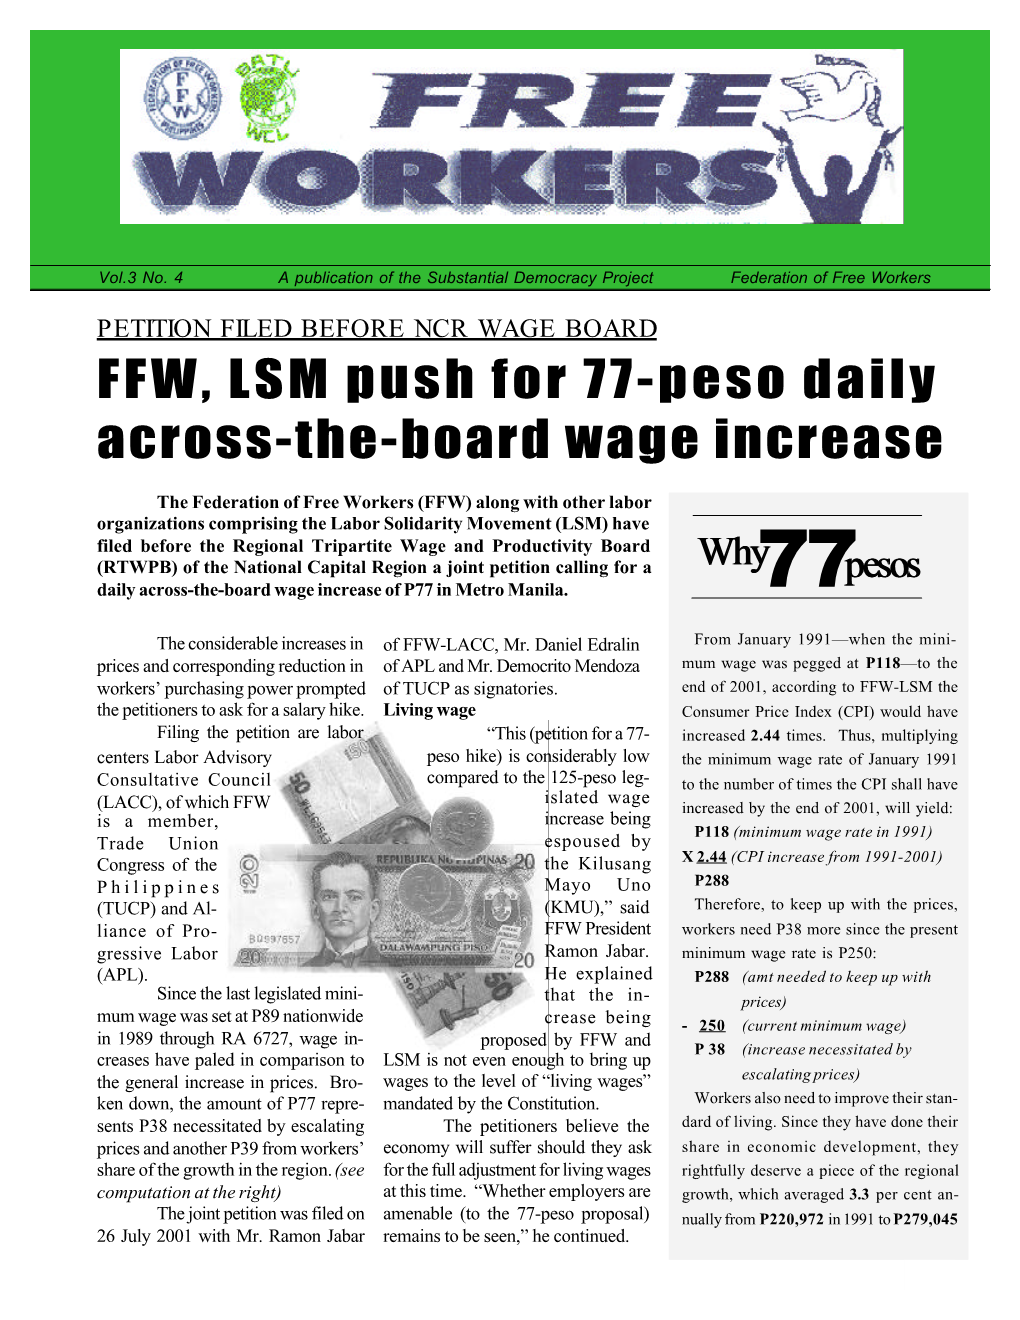 FFW, LSM Push for 77-Peso Daily Across-The-Board Wage Increase